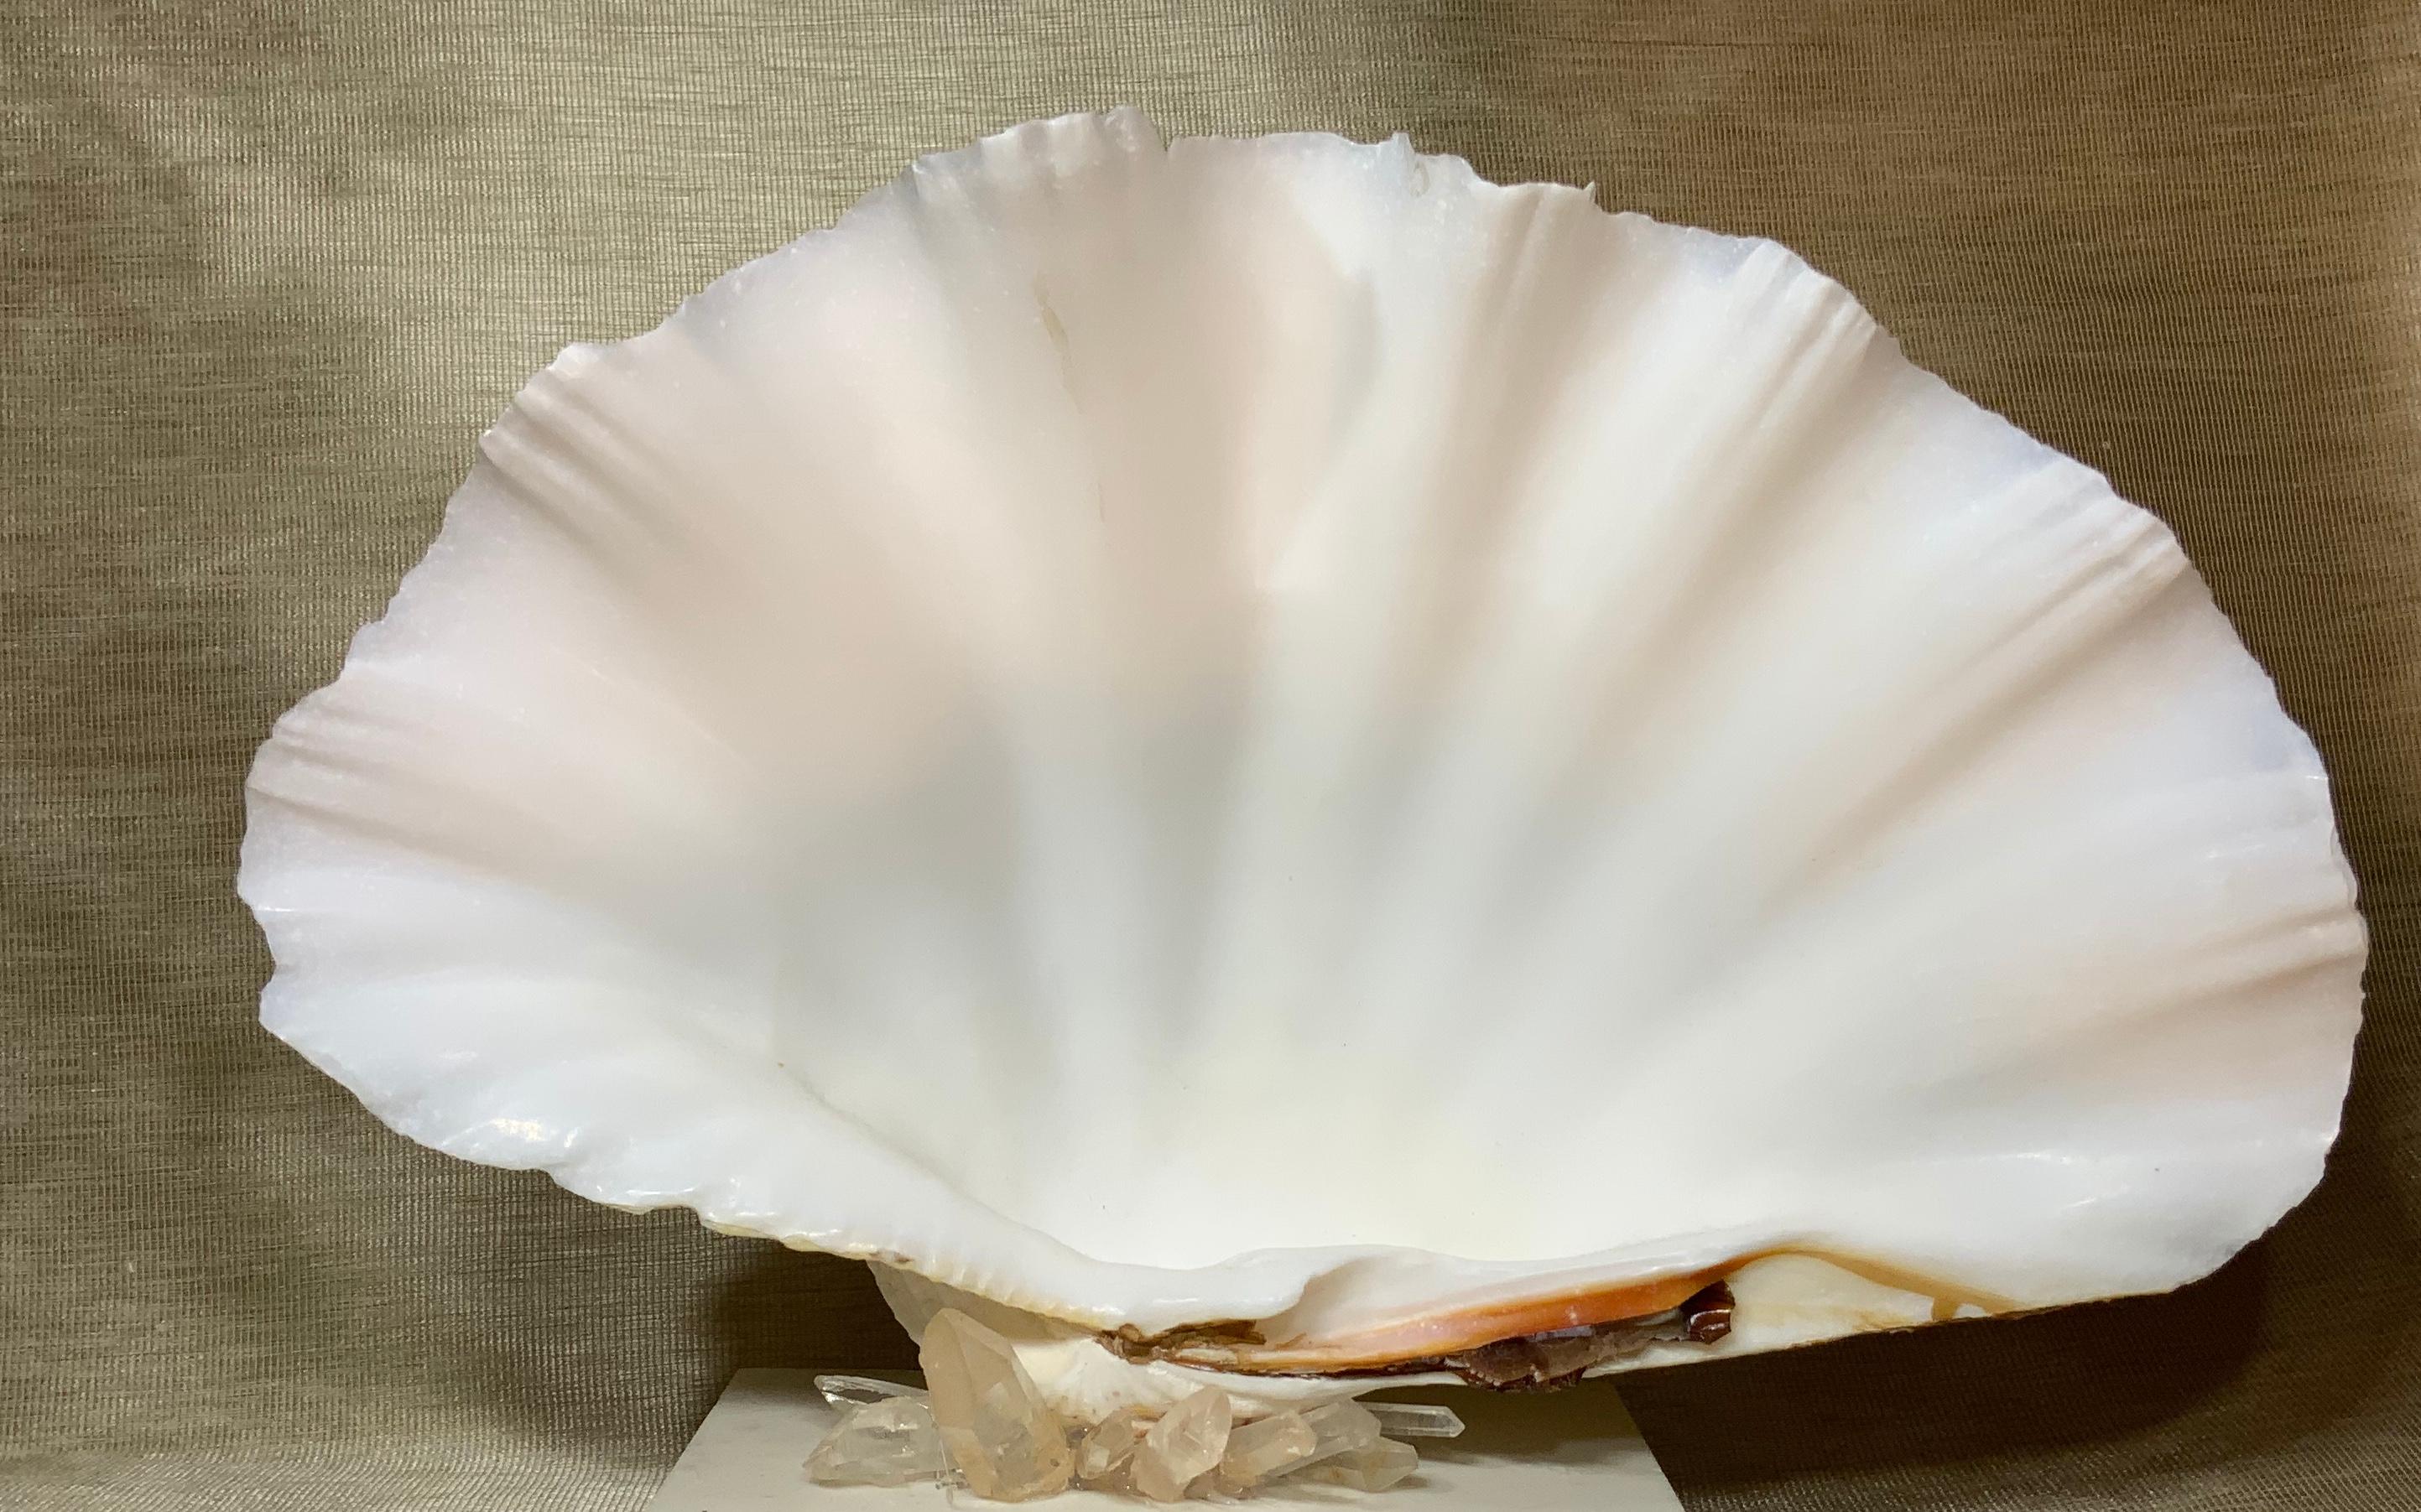 Beautiful natural clamshell with almost flawless white and alabaster color professionally mounted on a white color marble base, decorated with natural crystal quartz pieces. exceptional object of art for display.
Base size: 6.75 x 5”.